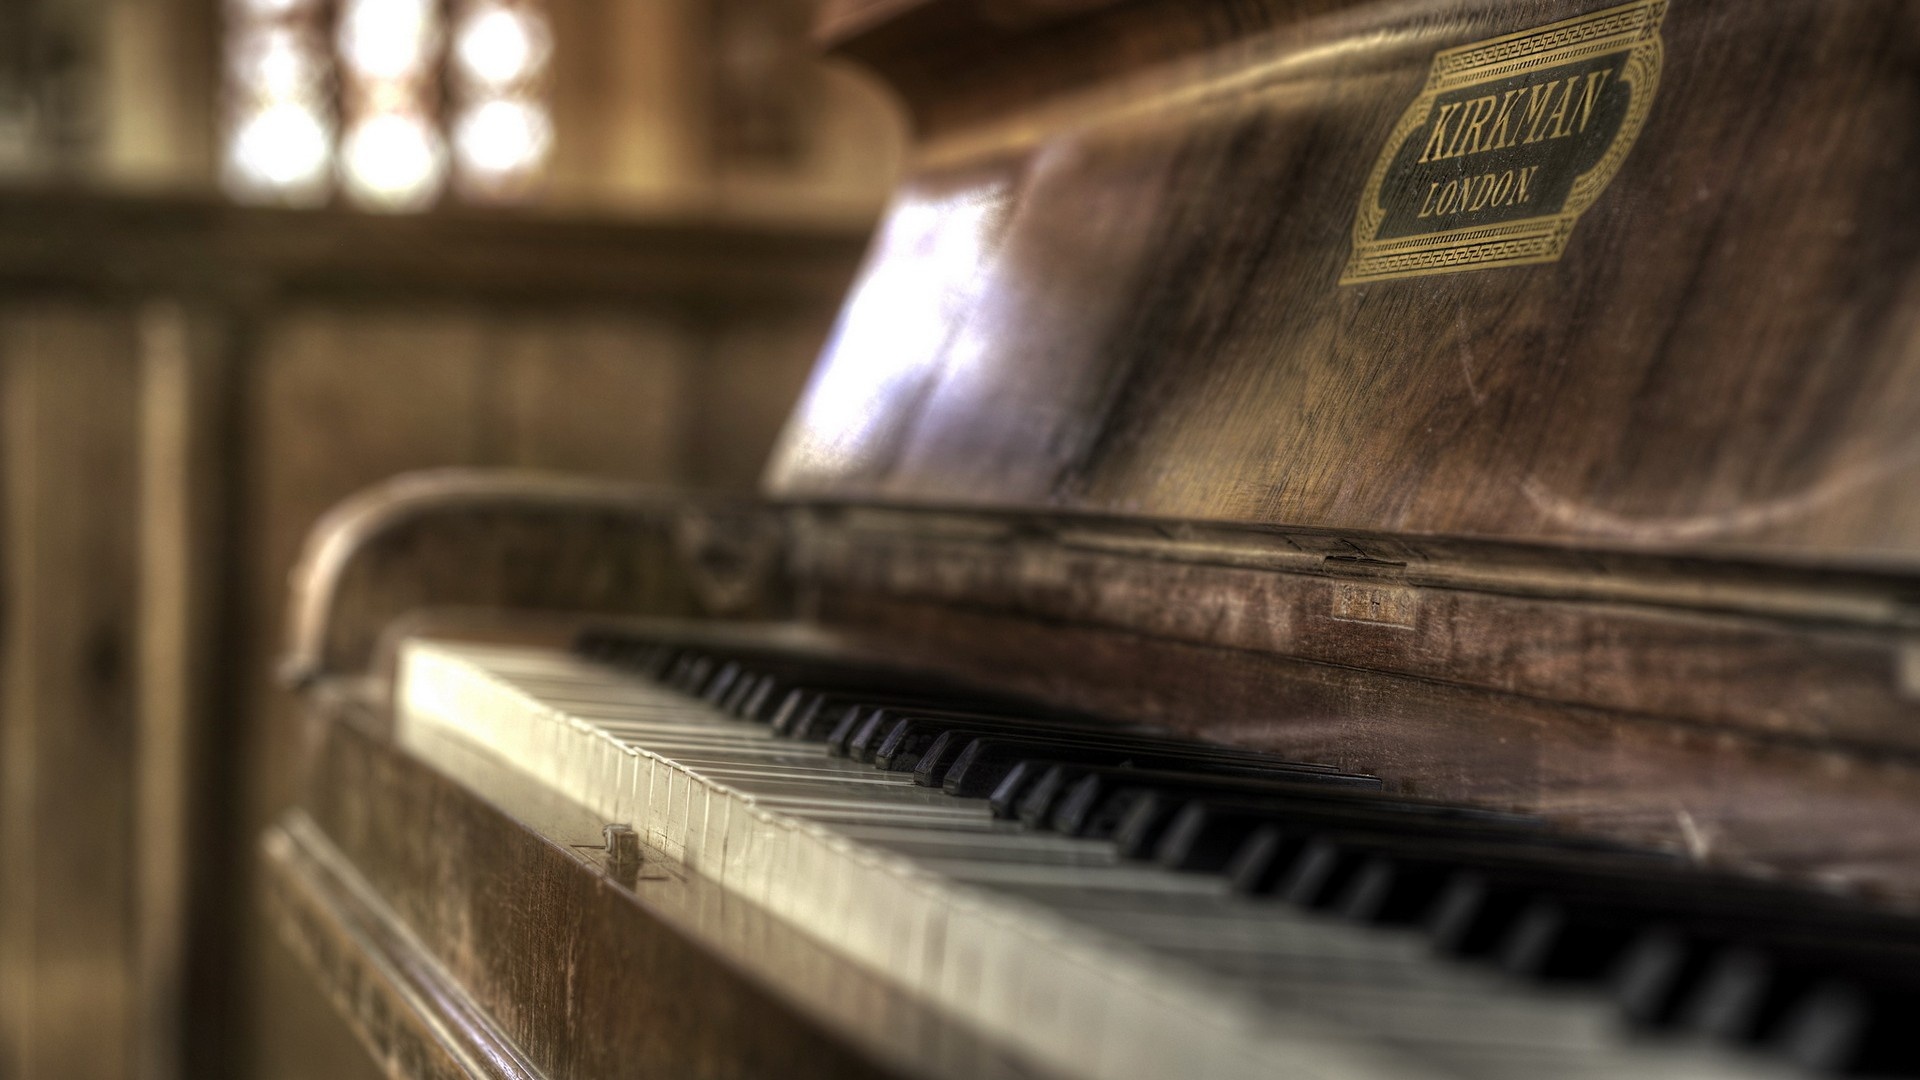 Piano: Kirkman Classical Model, For Home Use And Chamber Concerts. 1920x1080 Full HD Background.